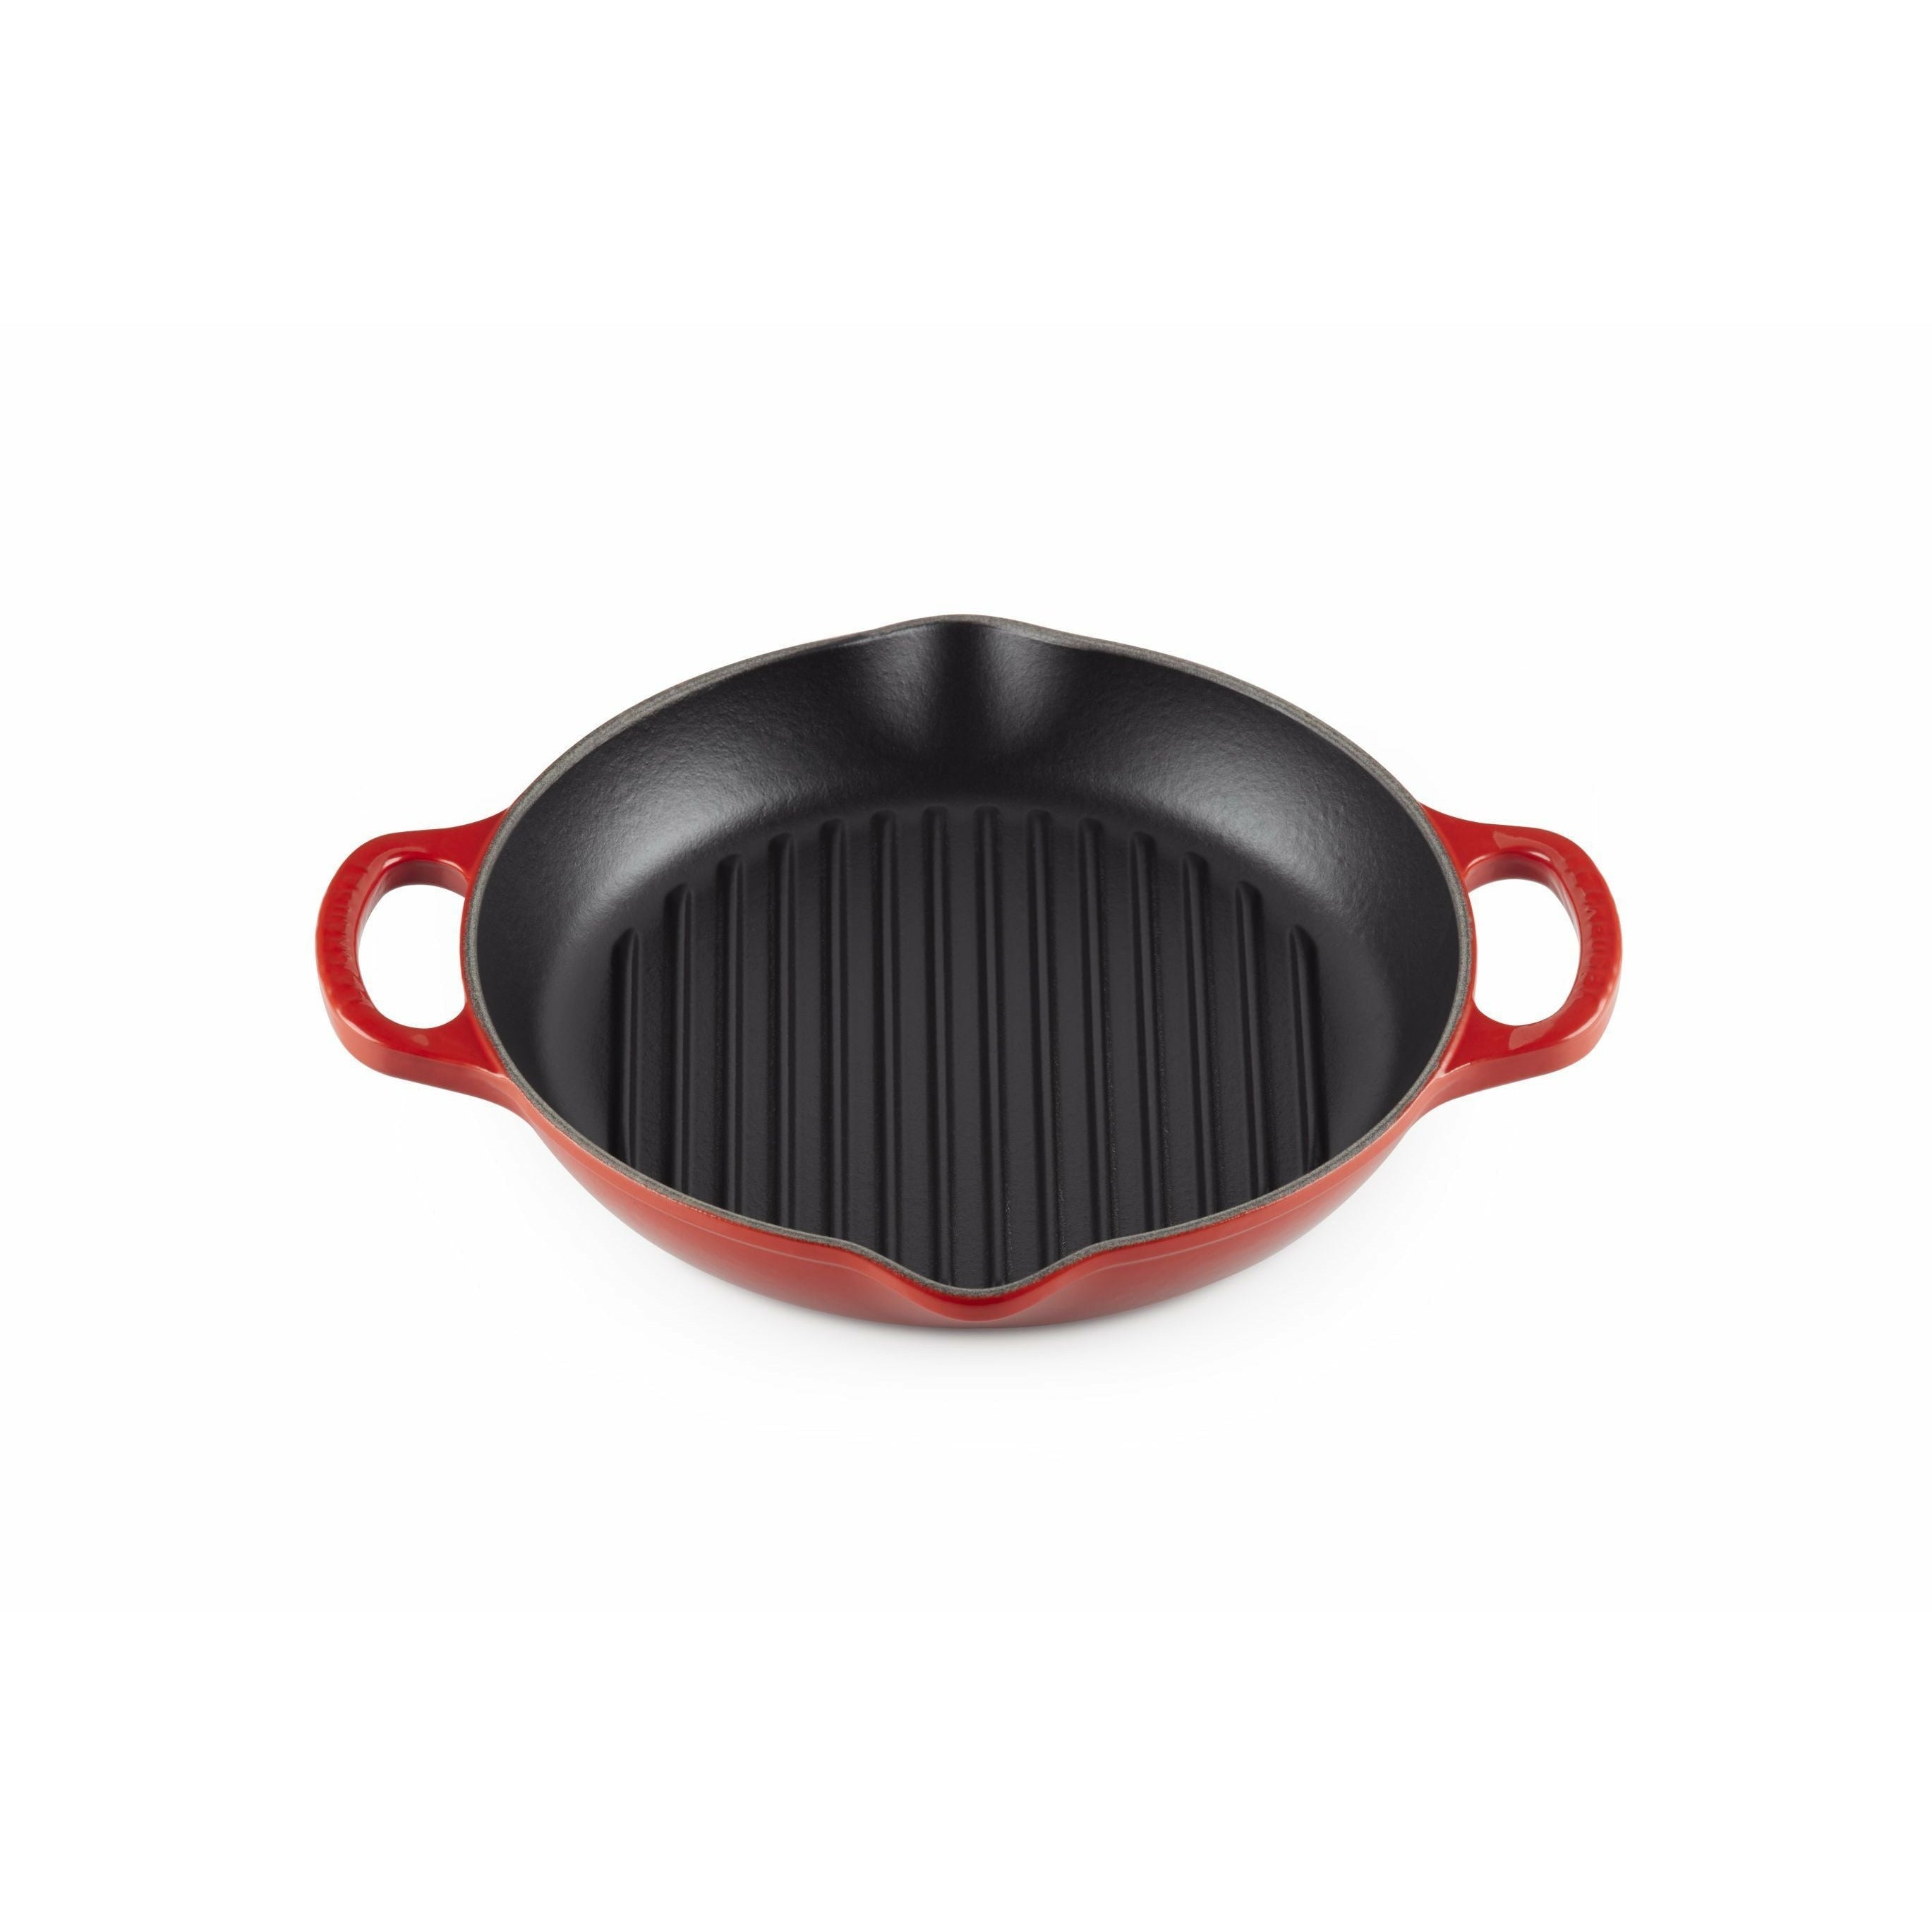 Le Creuset Nature High Round Grill Pan 25 Cm, Cherry Red